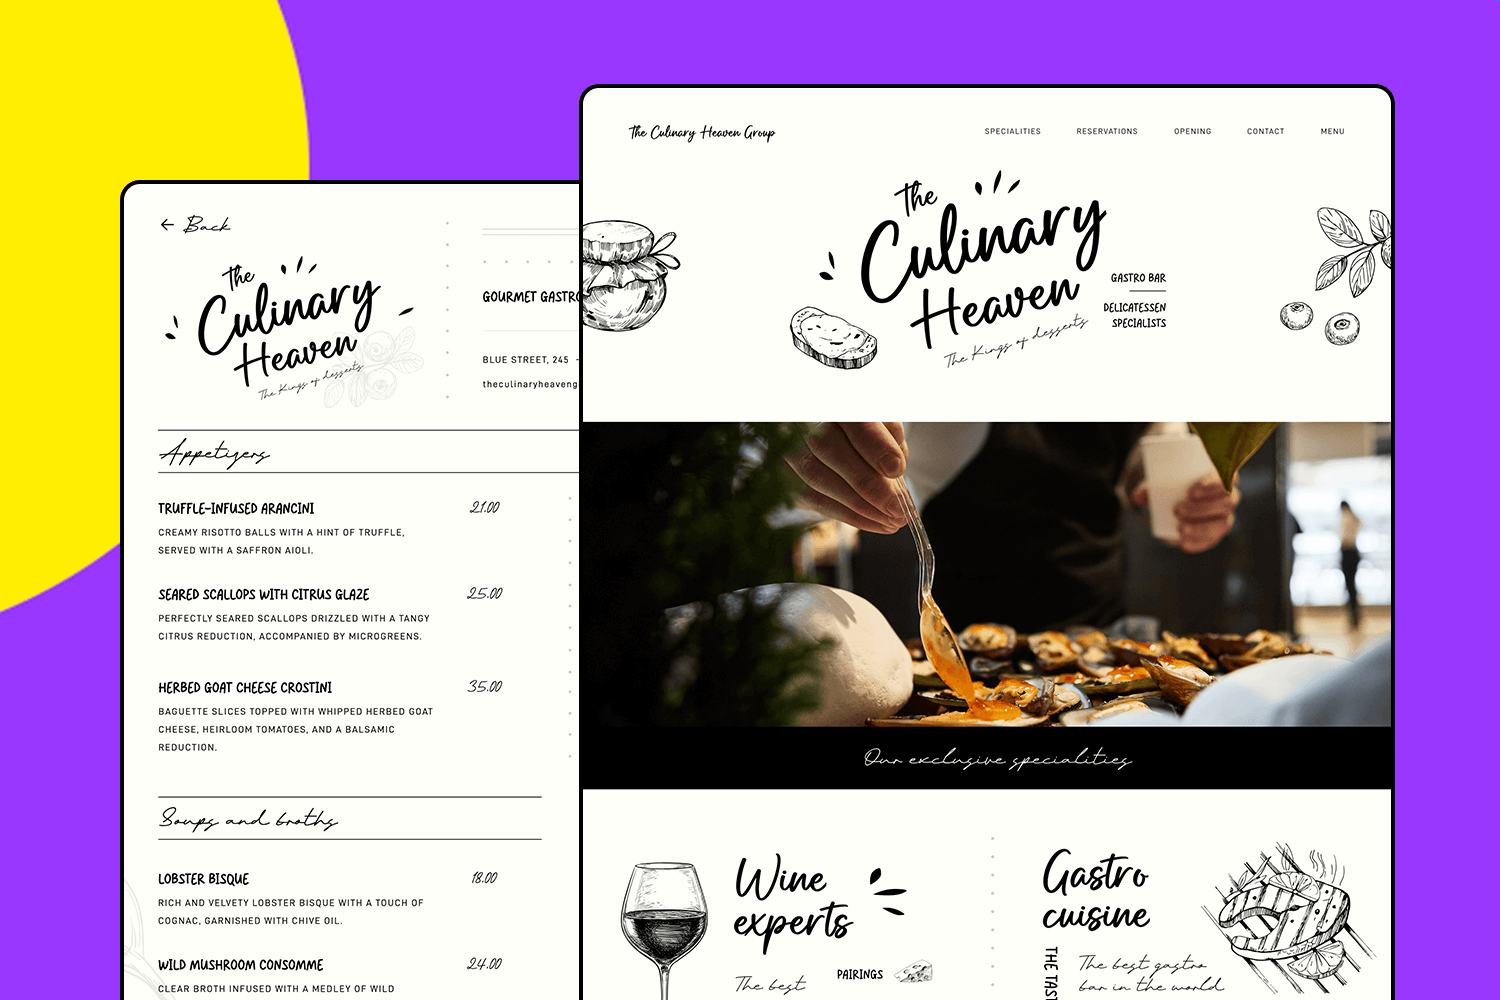 Restaurant website featuring menu items and culinary specialties